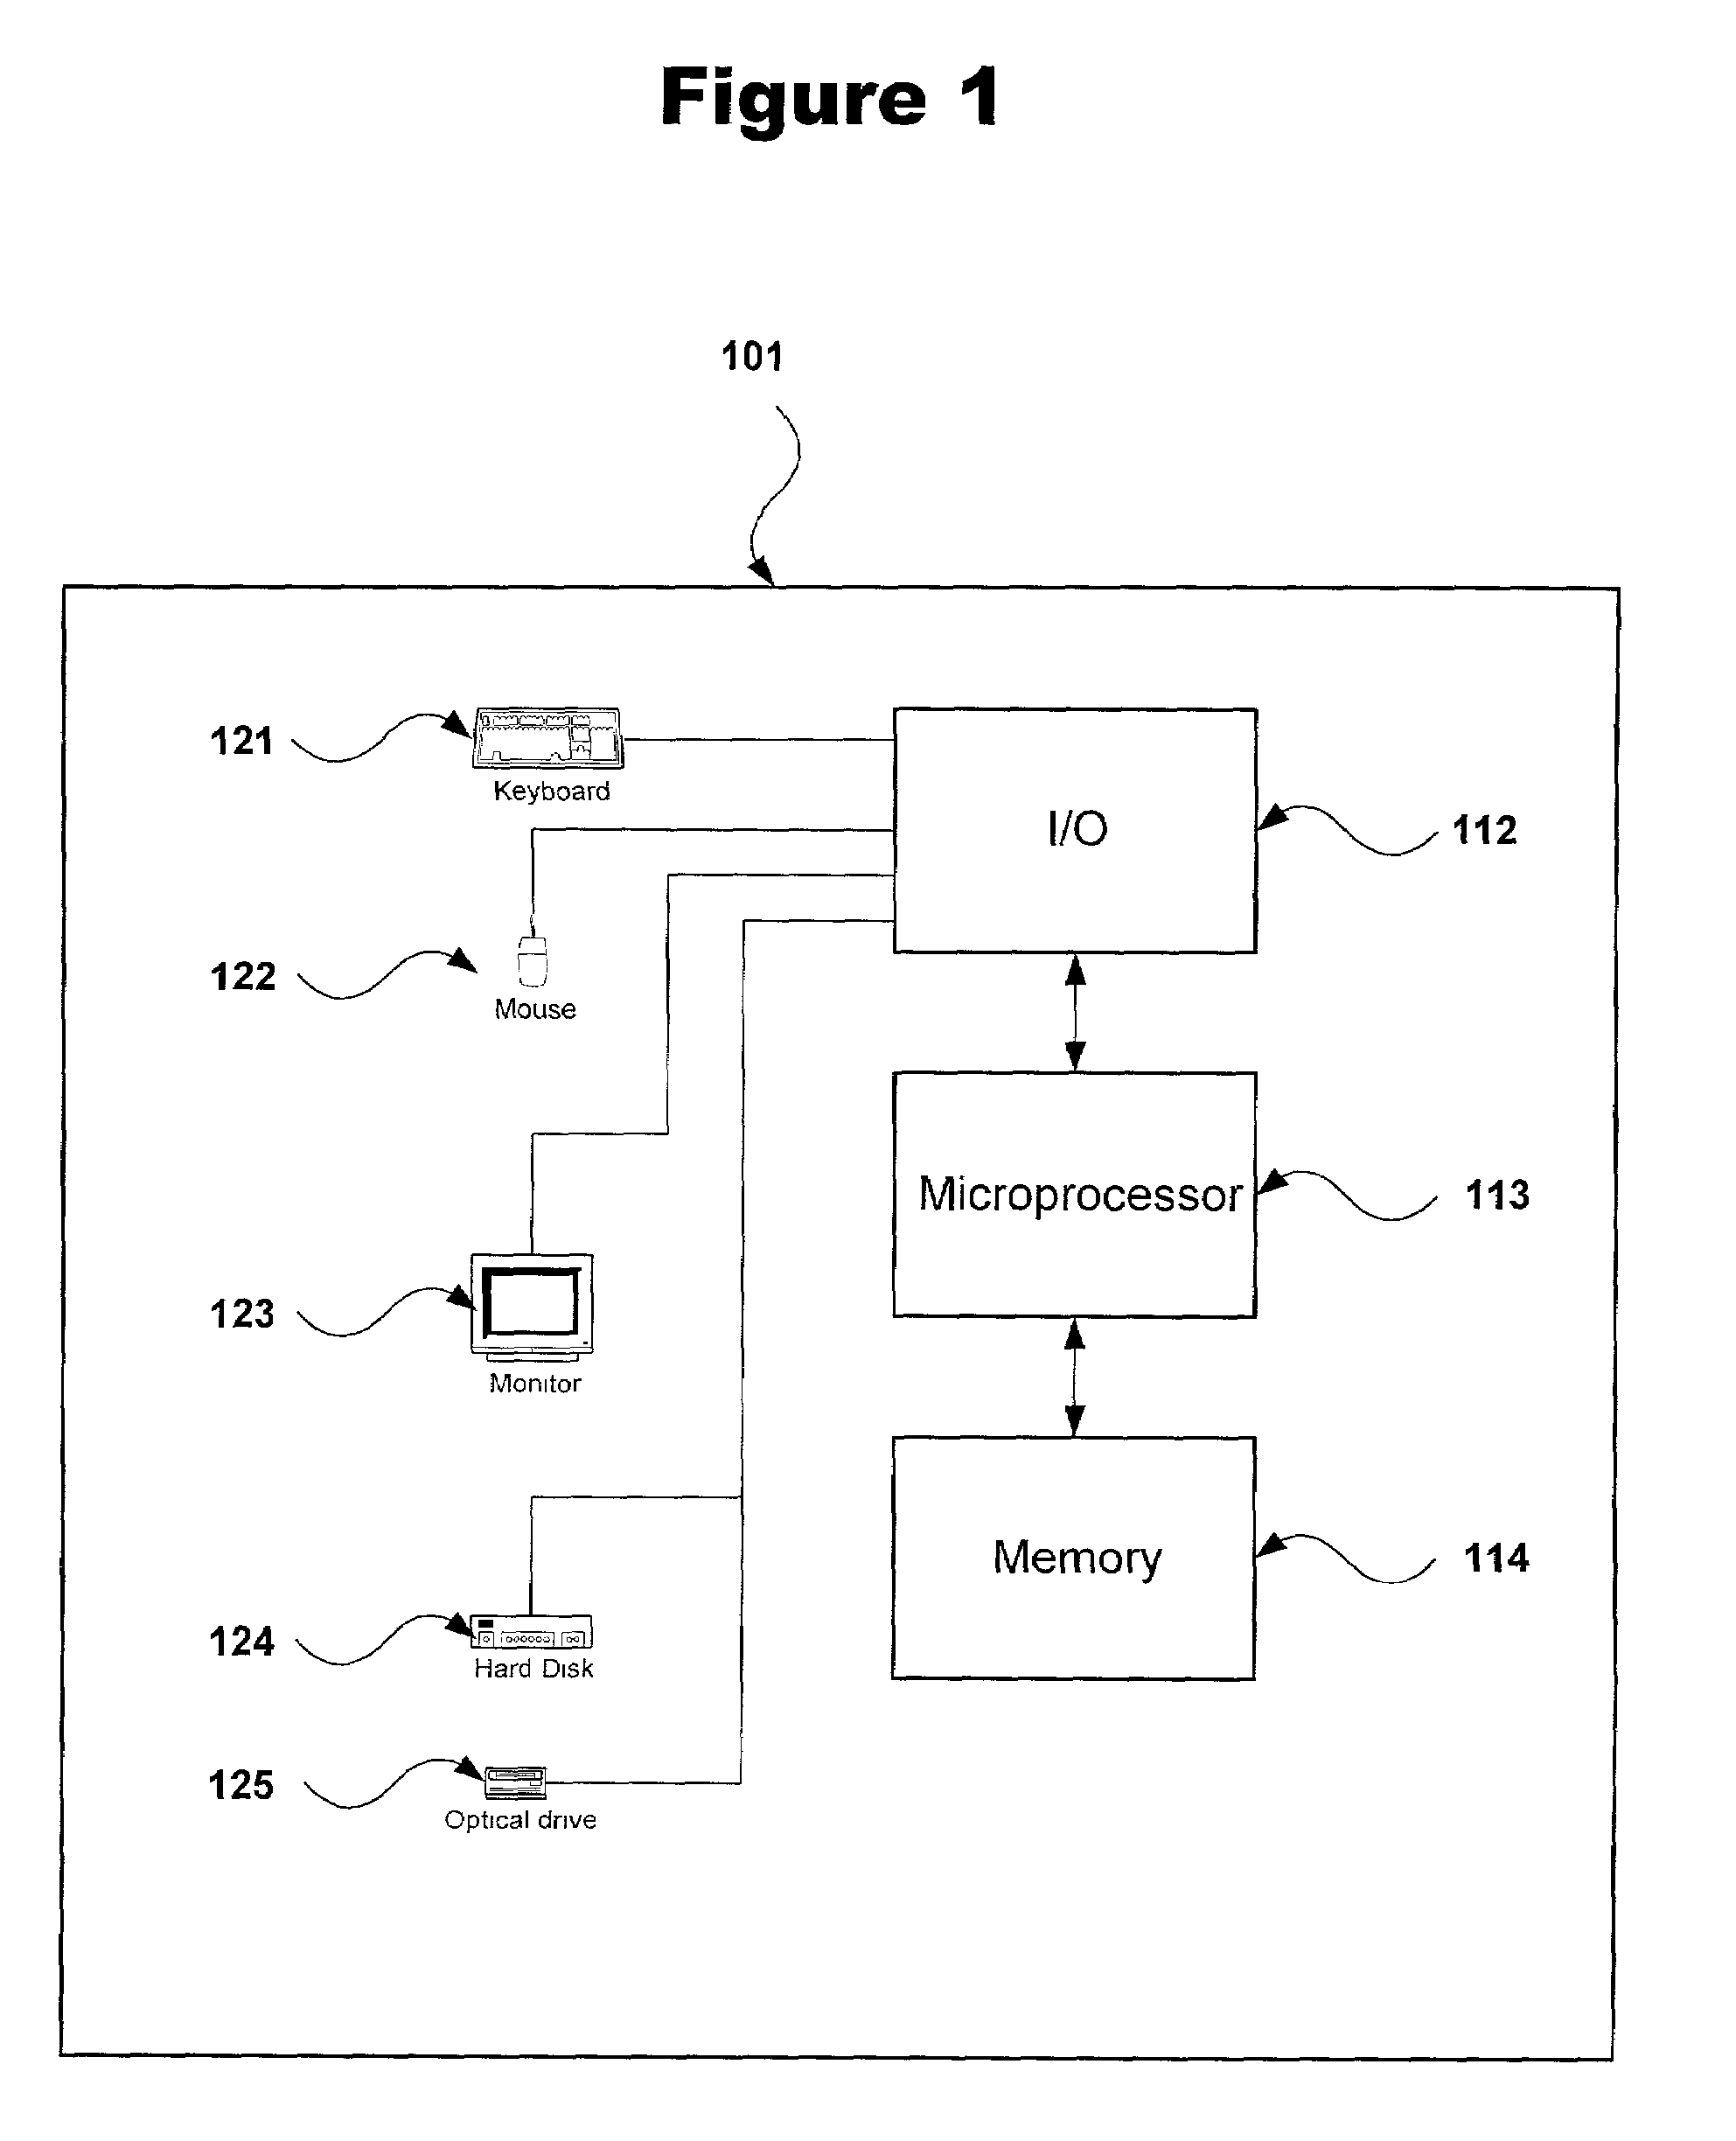 Method and system for obfuscation of computer program execution flow to increase computer program security